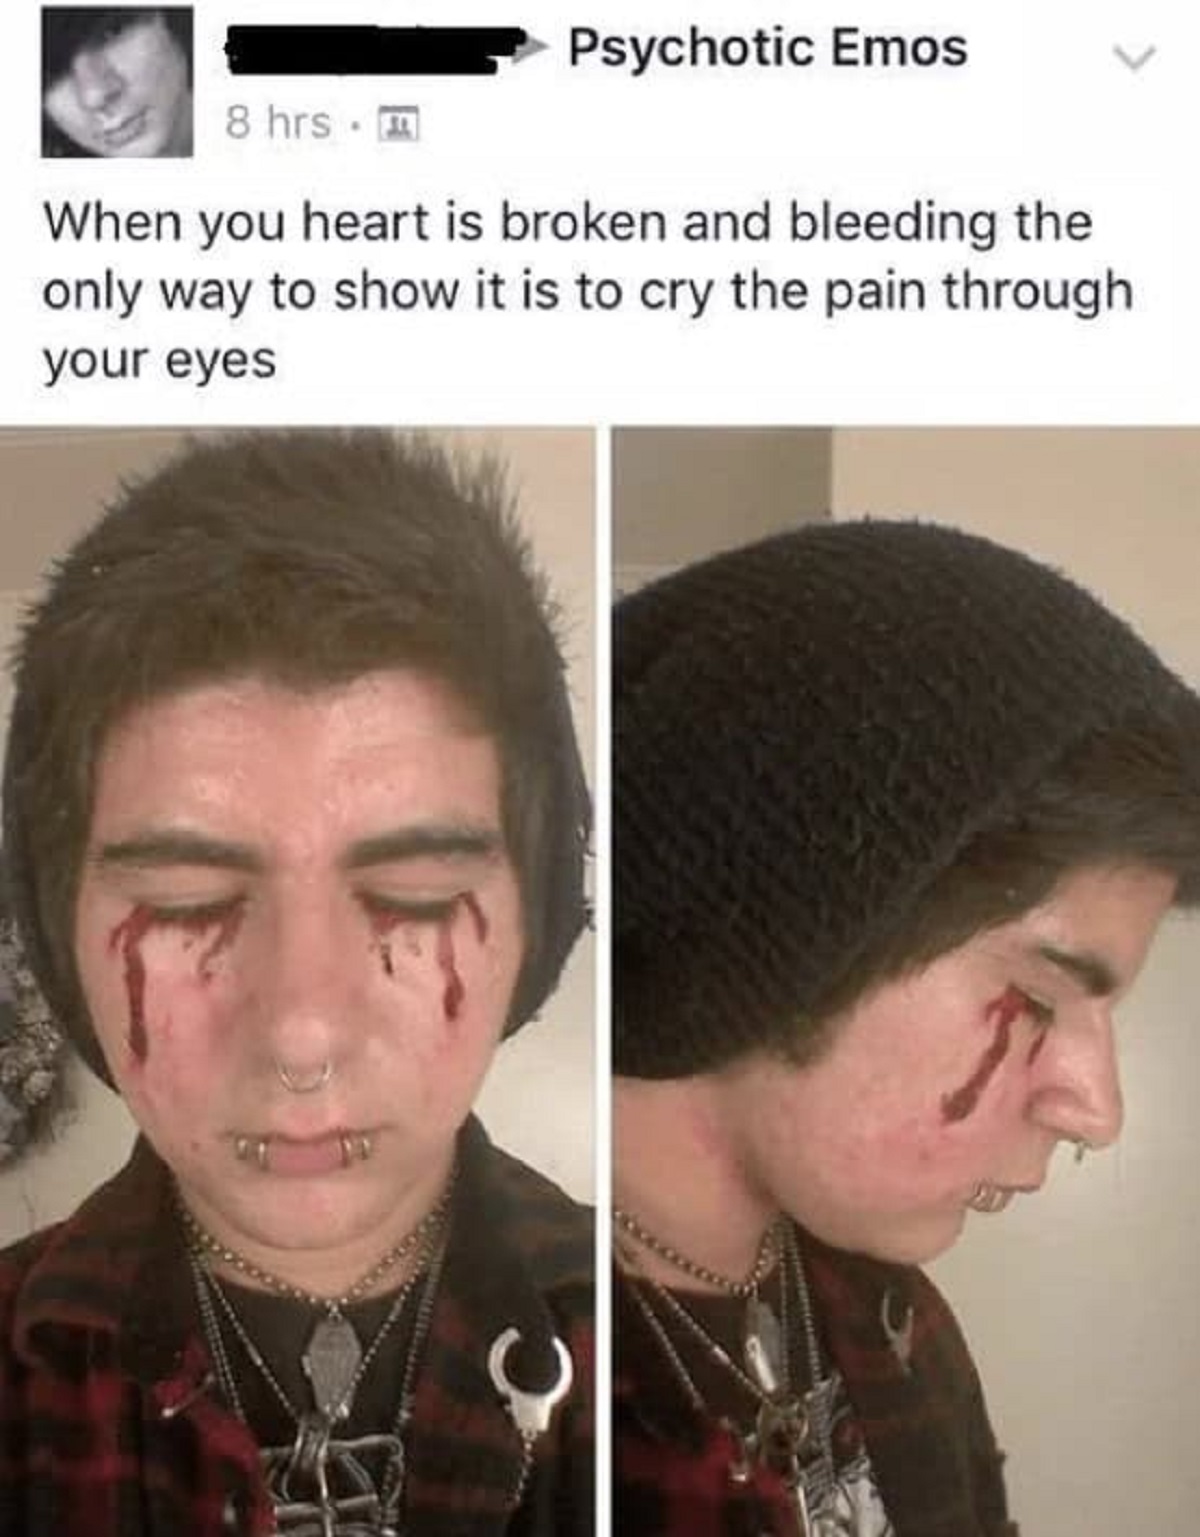 photo caption - C 8 hrs m Psychotic Emos When you heart is broken and bleeding the only way to show it is to cry the pain through your eyes